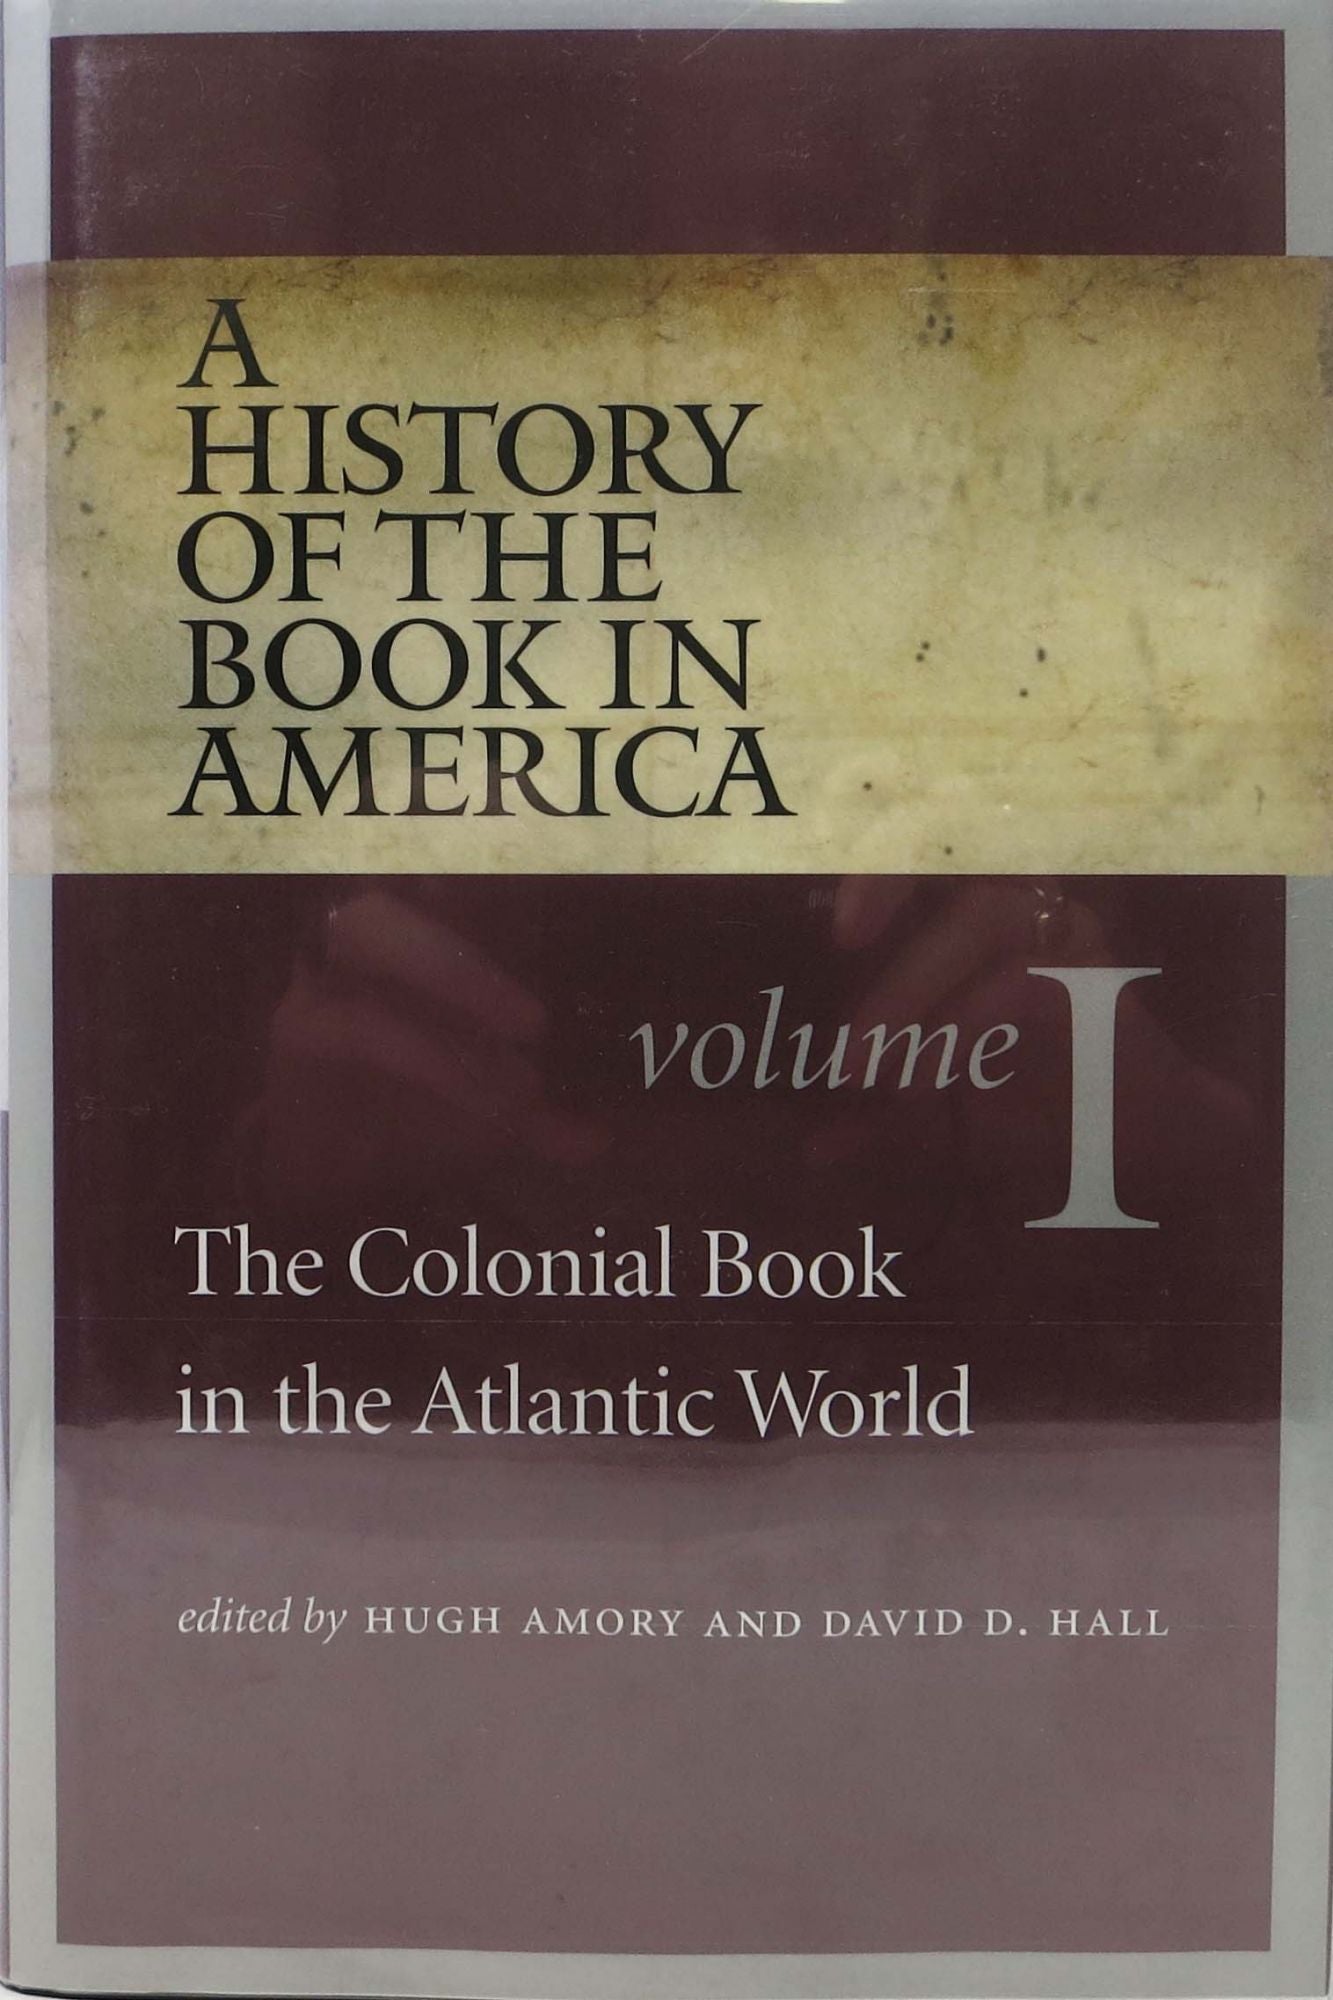 Amory, Hugh & Hall, David D. - Editors - A HISTORY Of The BOOK In AMERICA. The Colonial Book in the Atlanic World. Volume 1